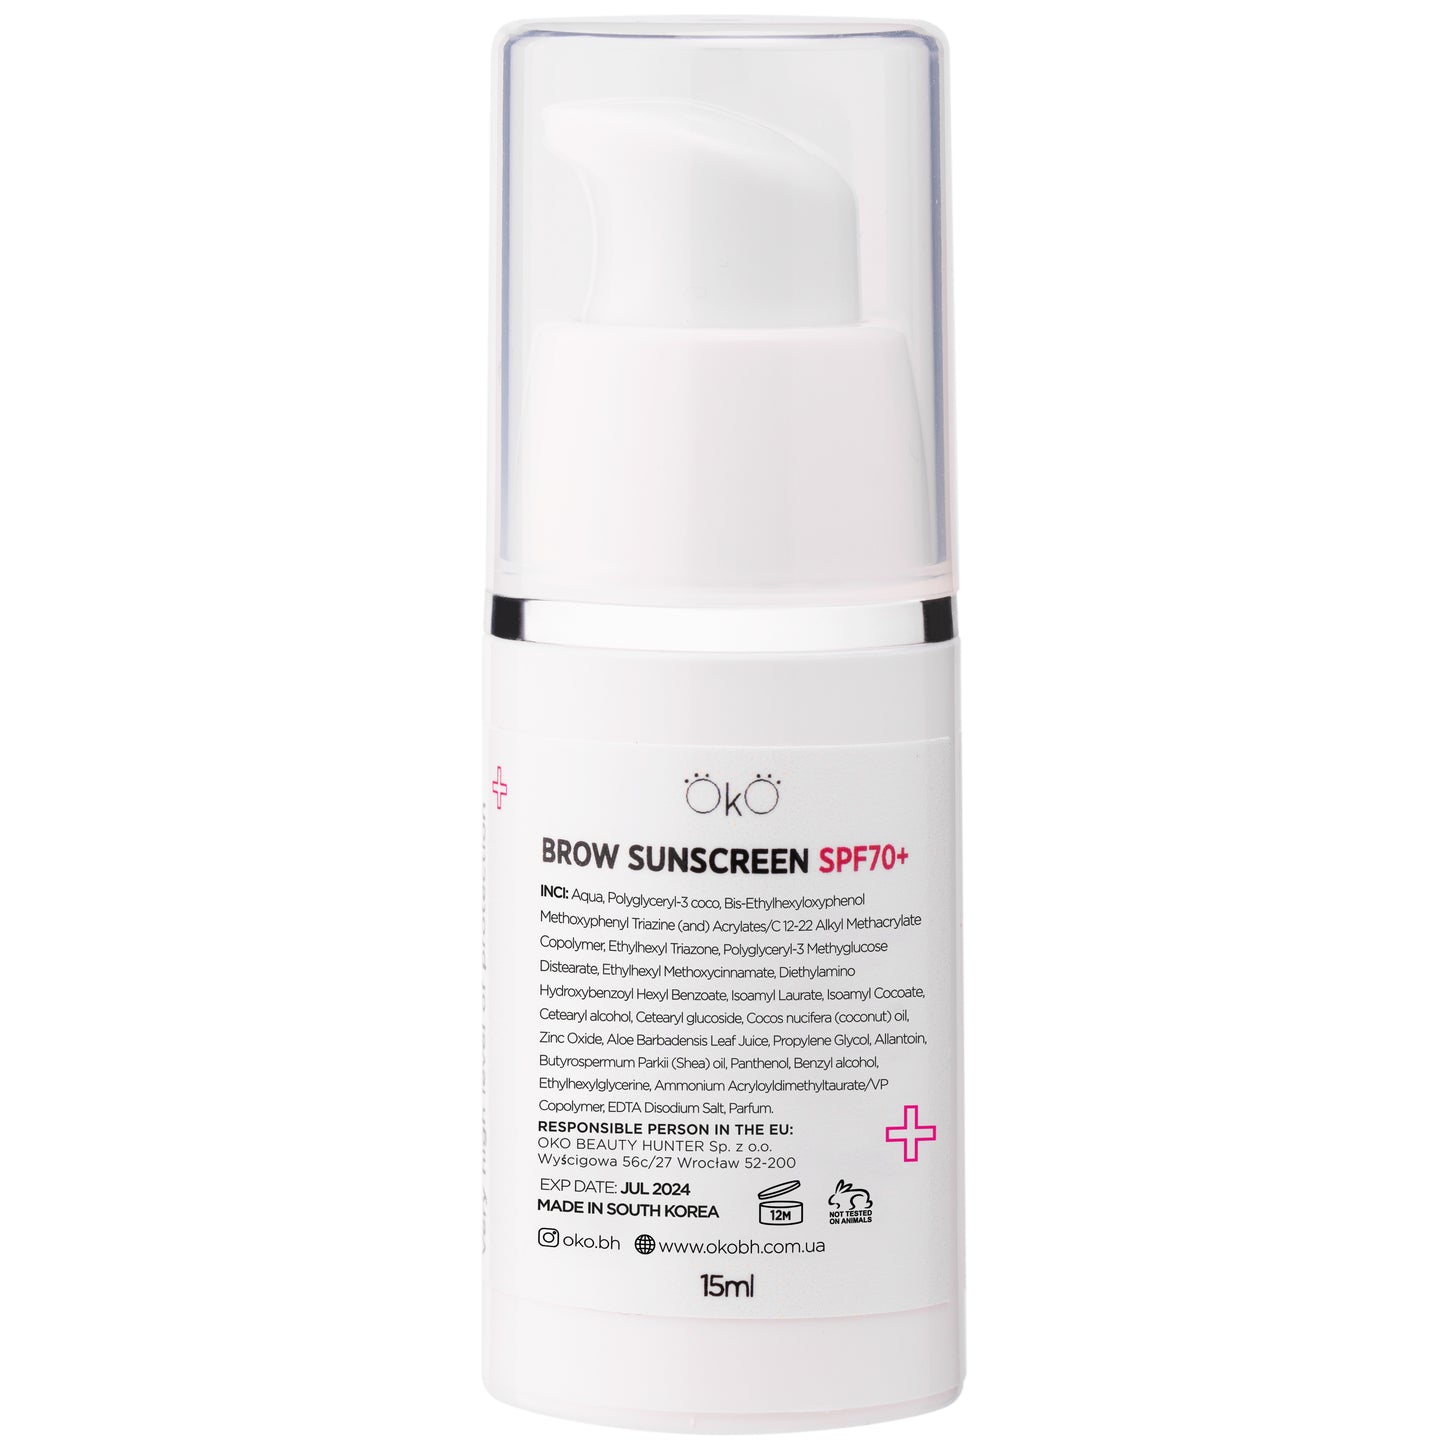 OKO Brow Sunscreen Cream for brows after permanent makeup SPF 70+ 15ml